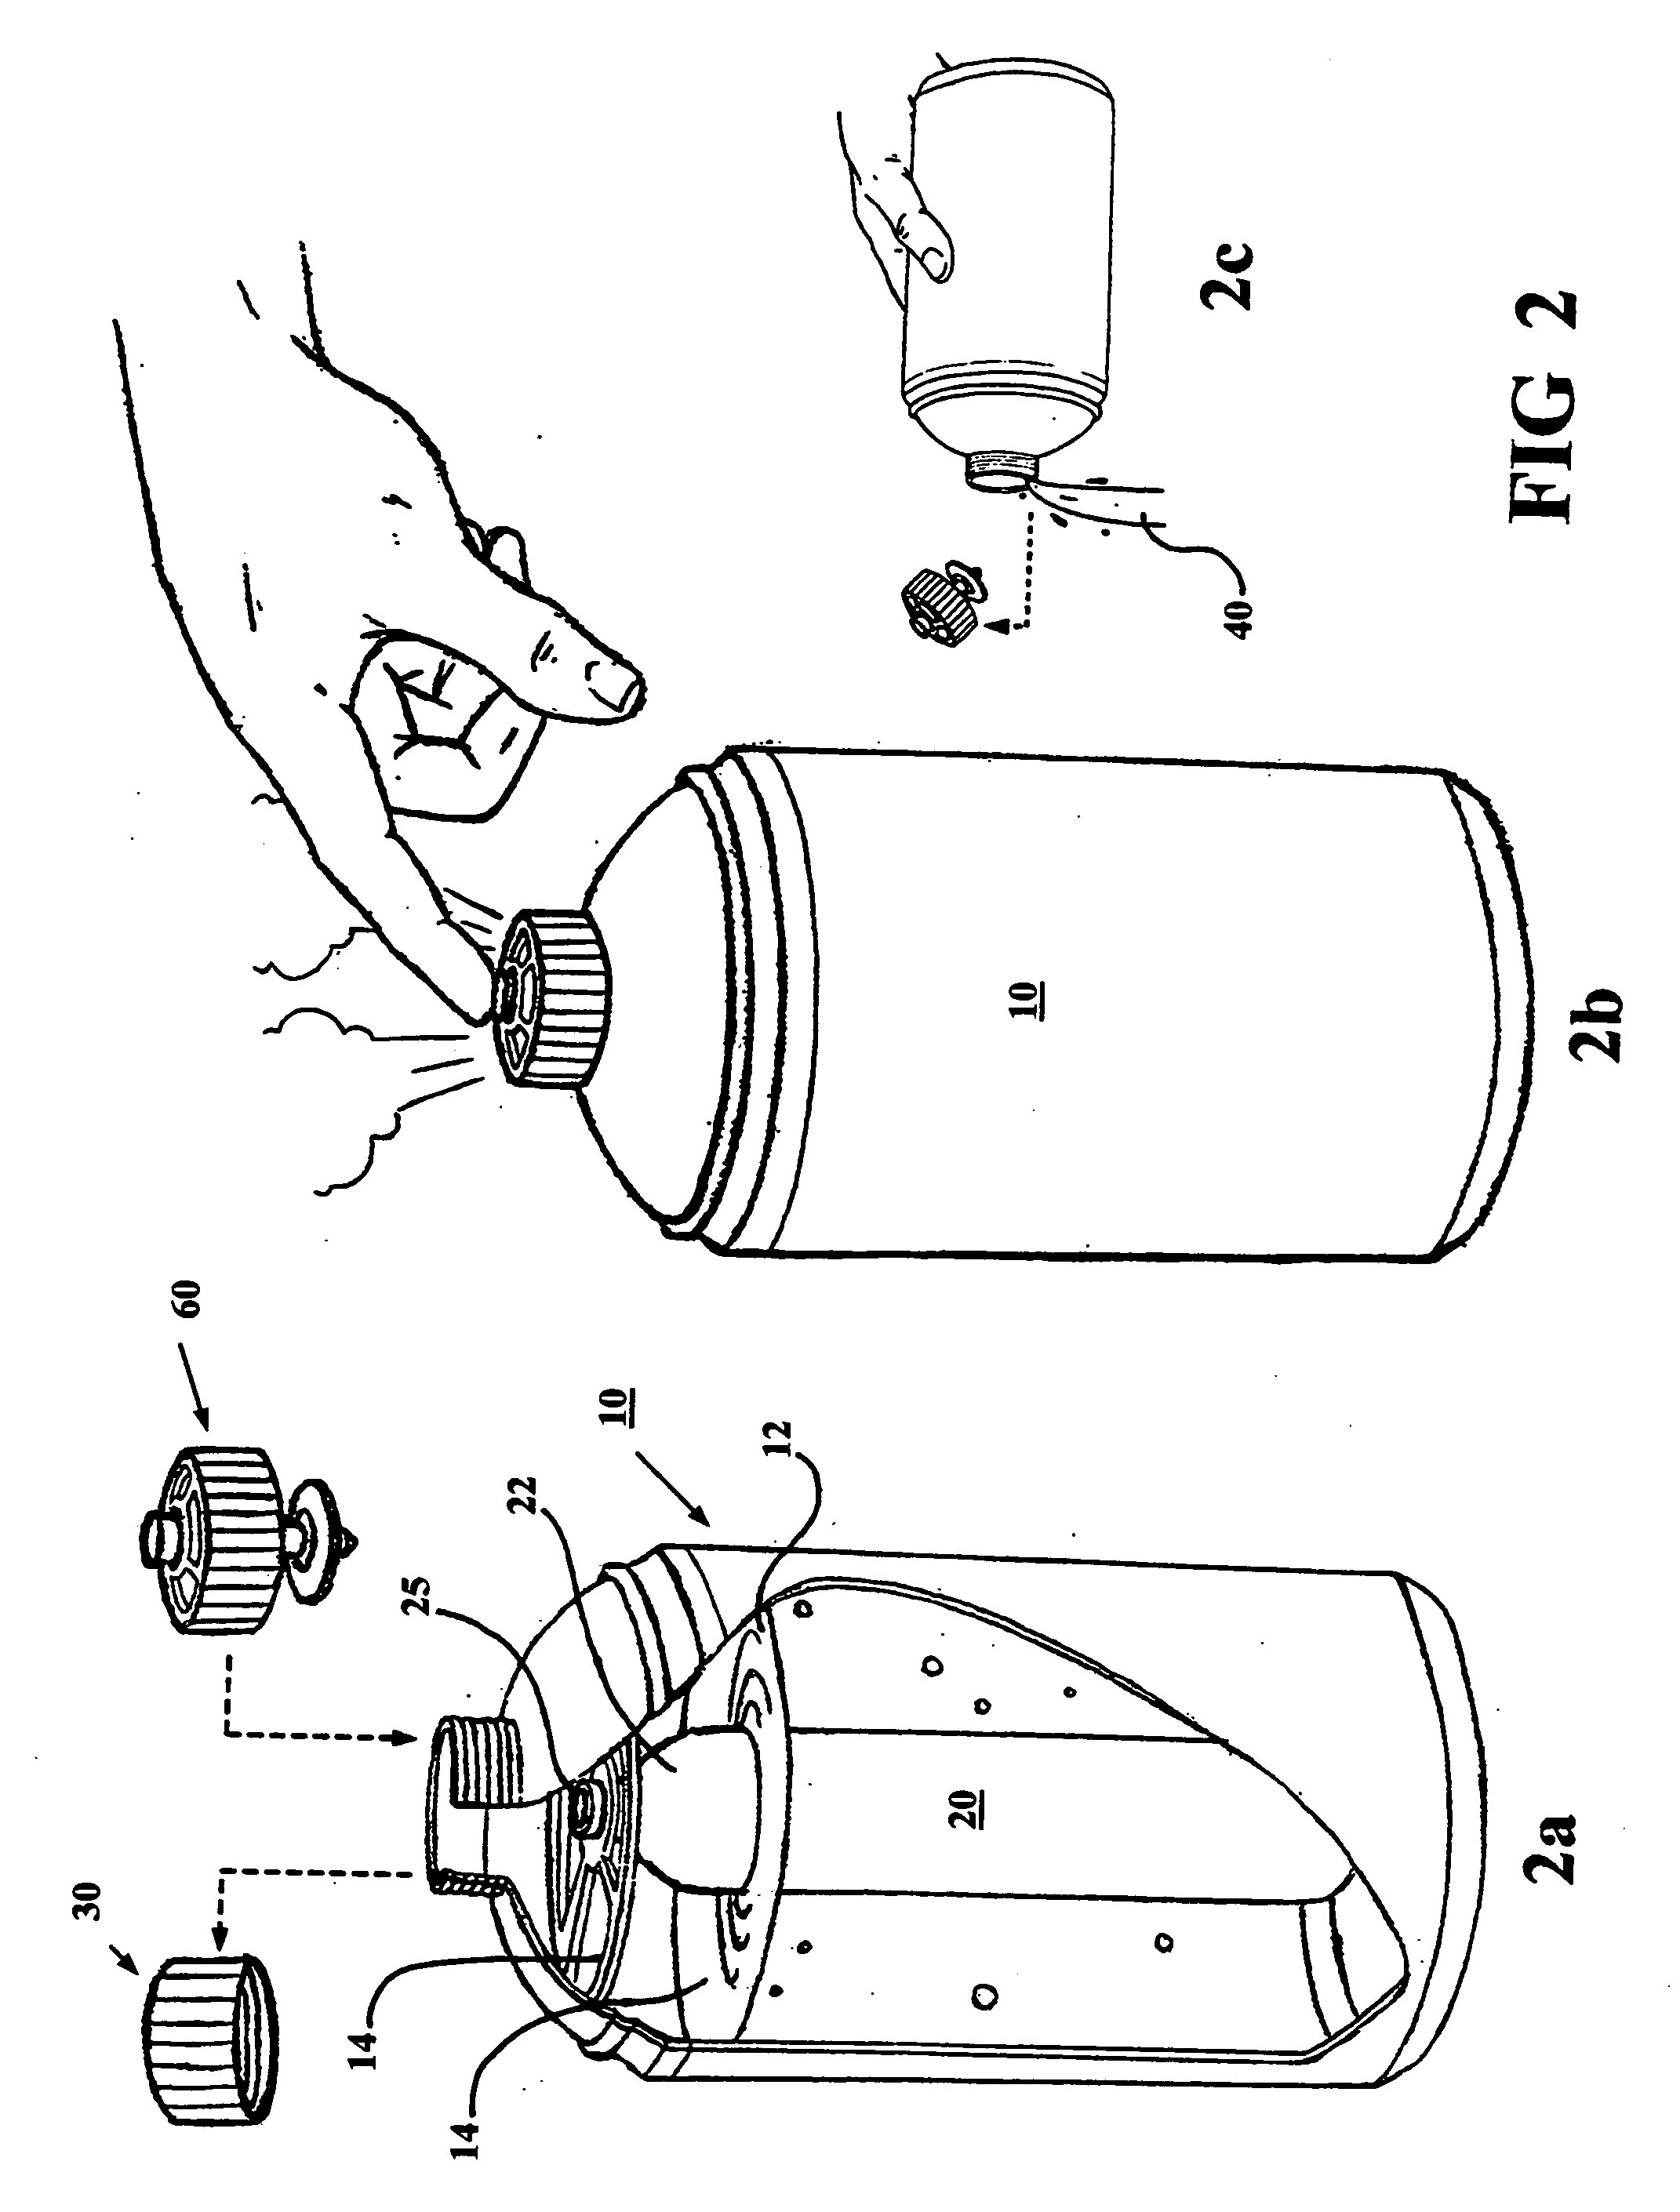 Self-chilling beverage container and method